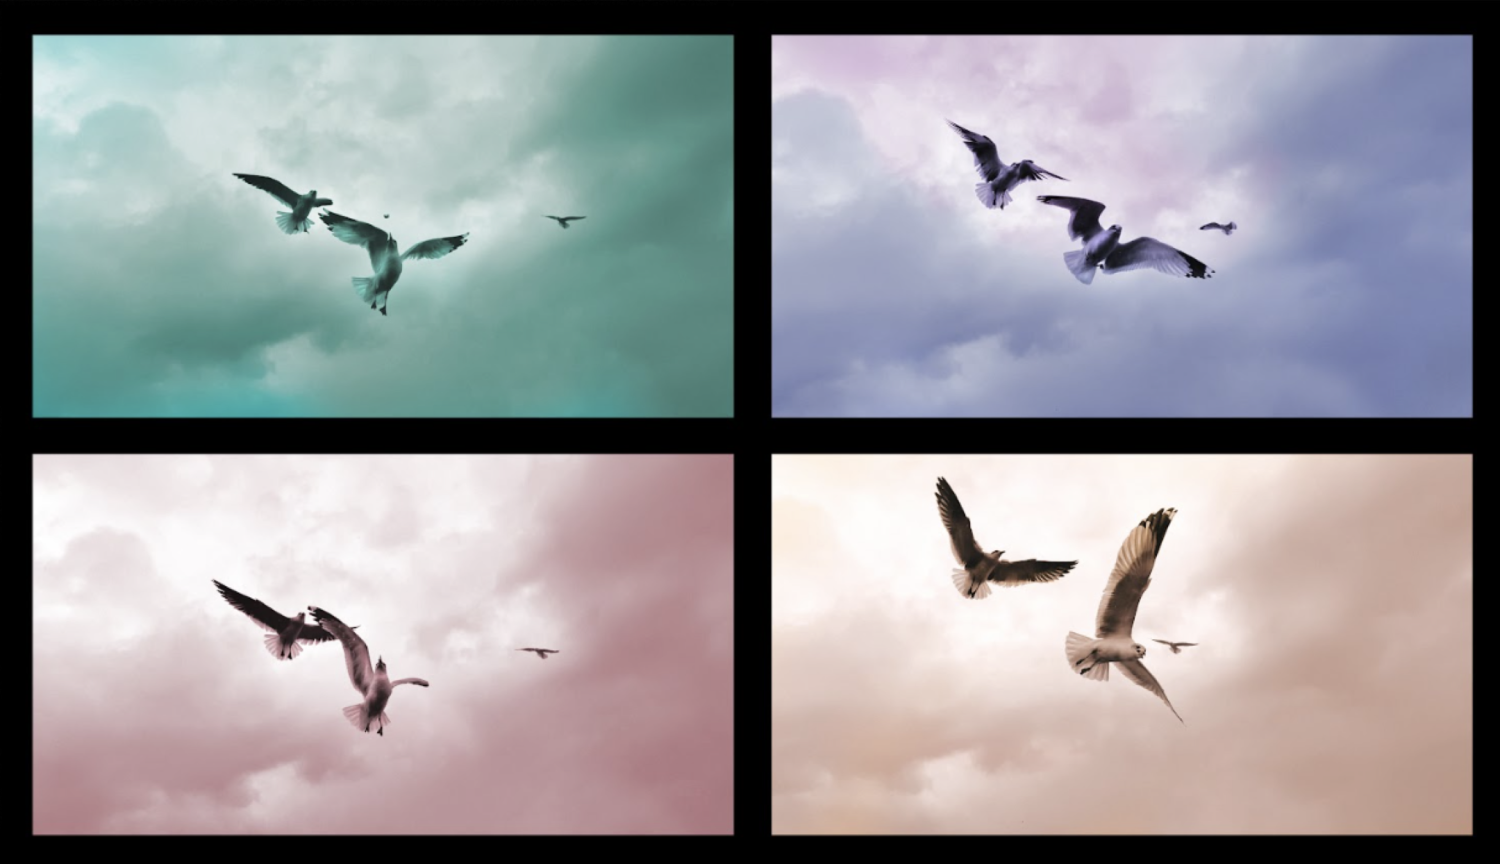 Four photos of seagulls - one in muted green, one in muted purple, one in muted pink, and one in muted brown